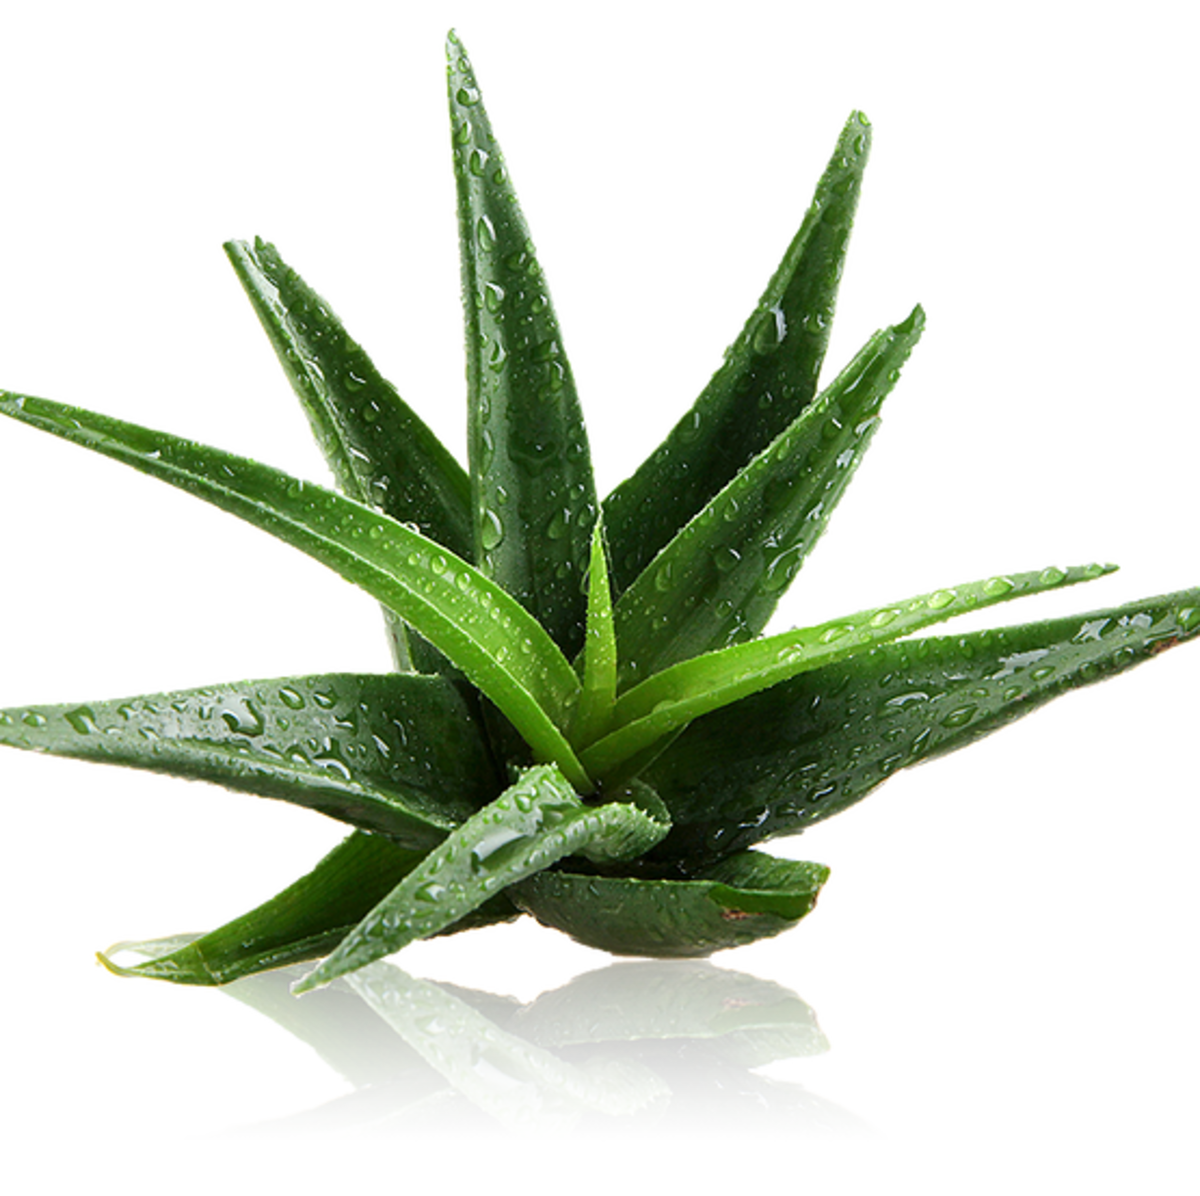 Aloe is great for sunburn and rashes.